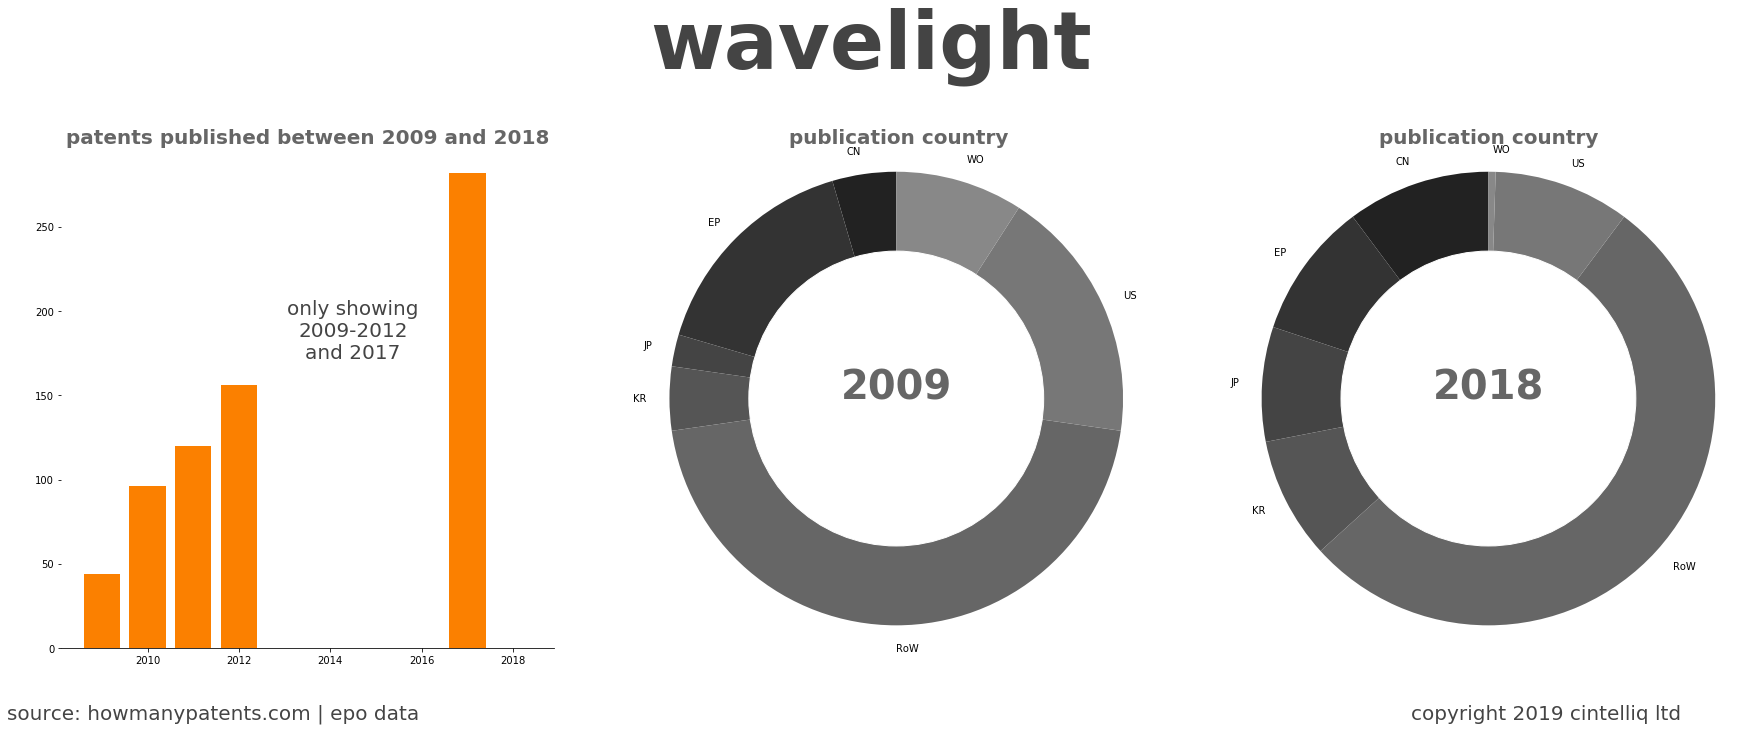 summary of patents for Wavelight